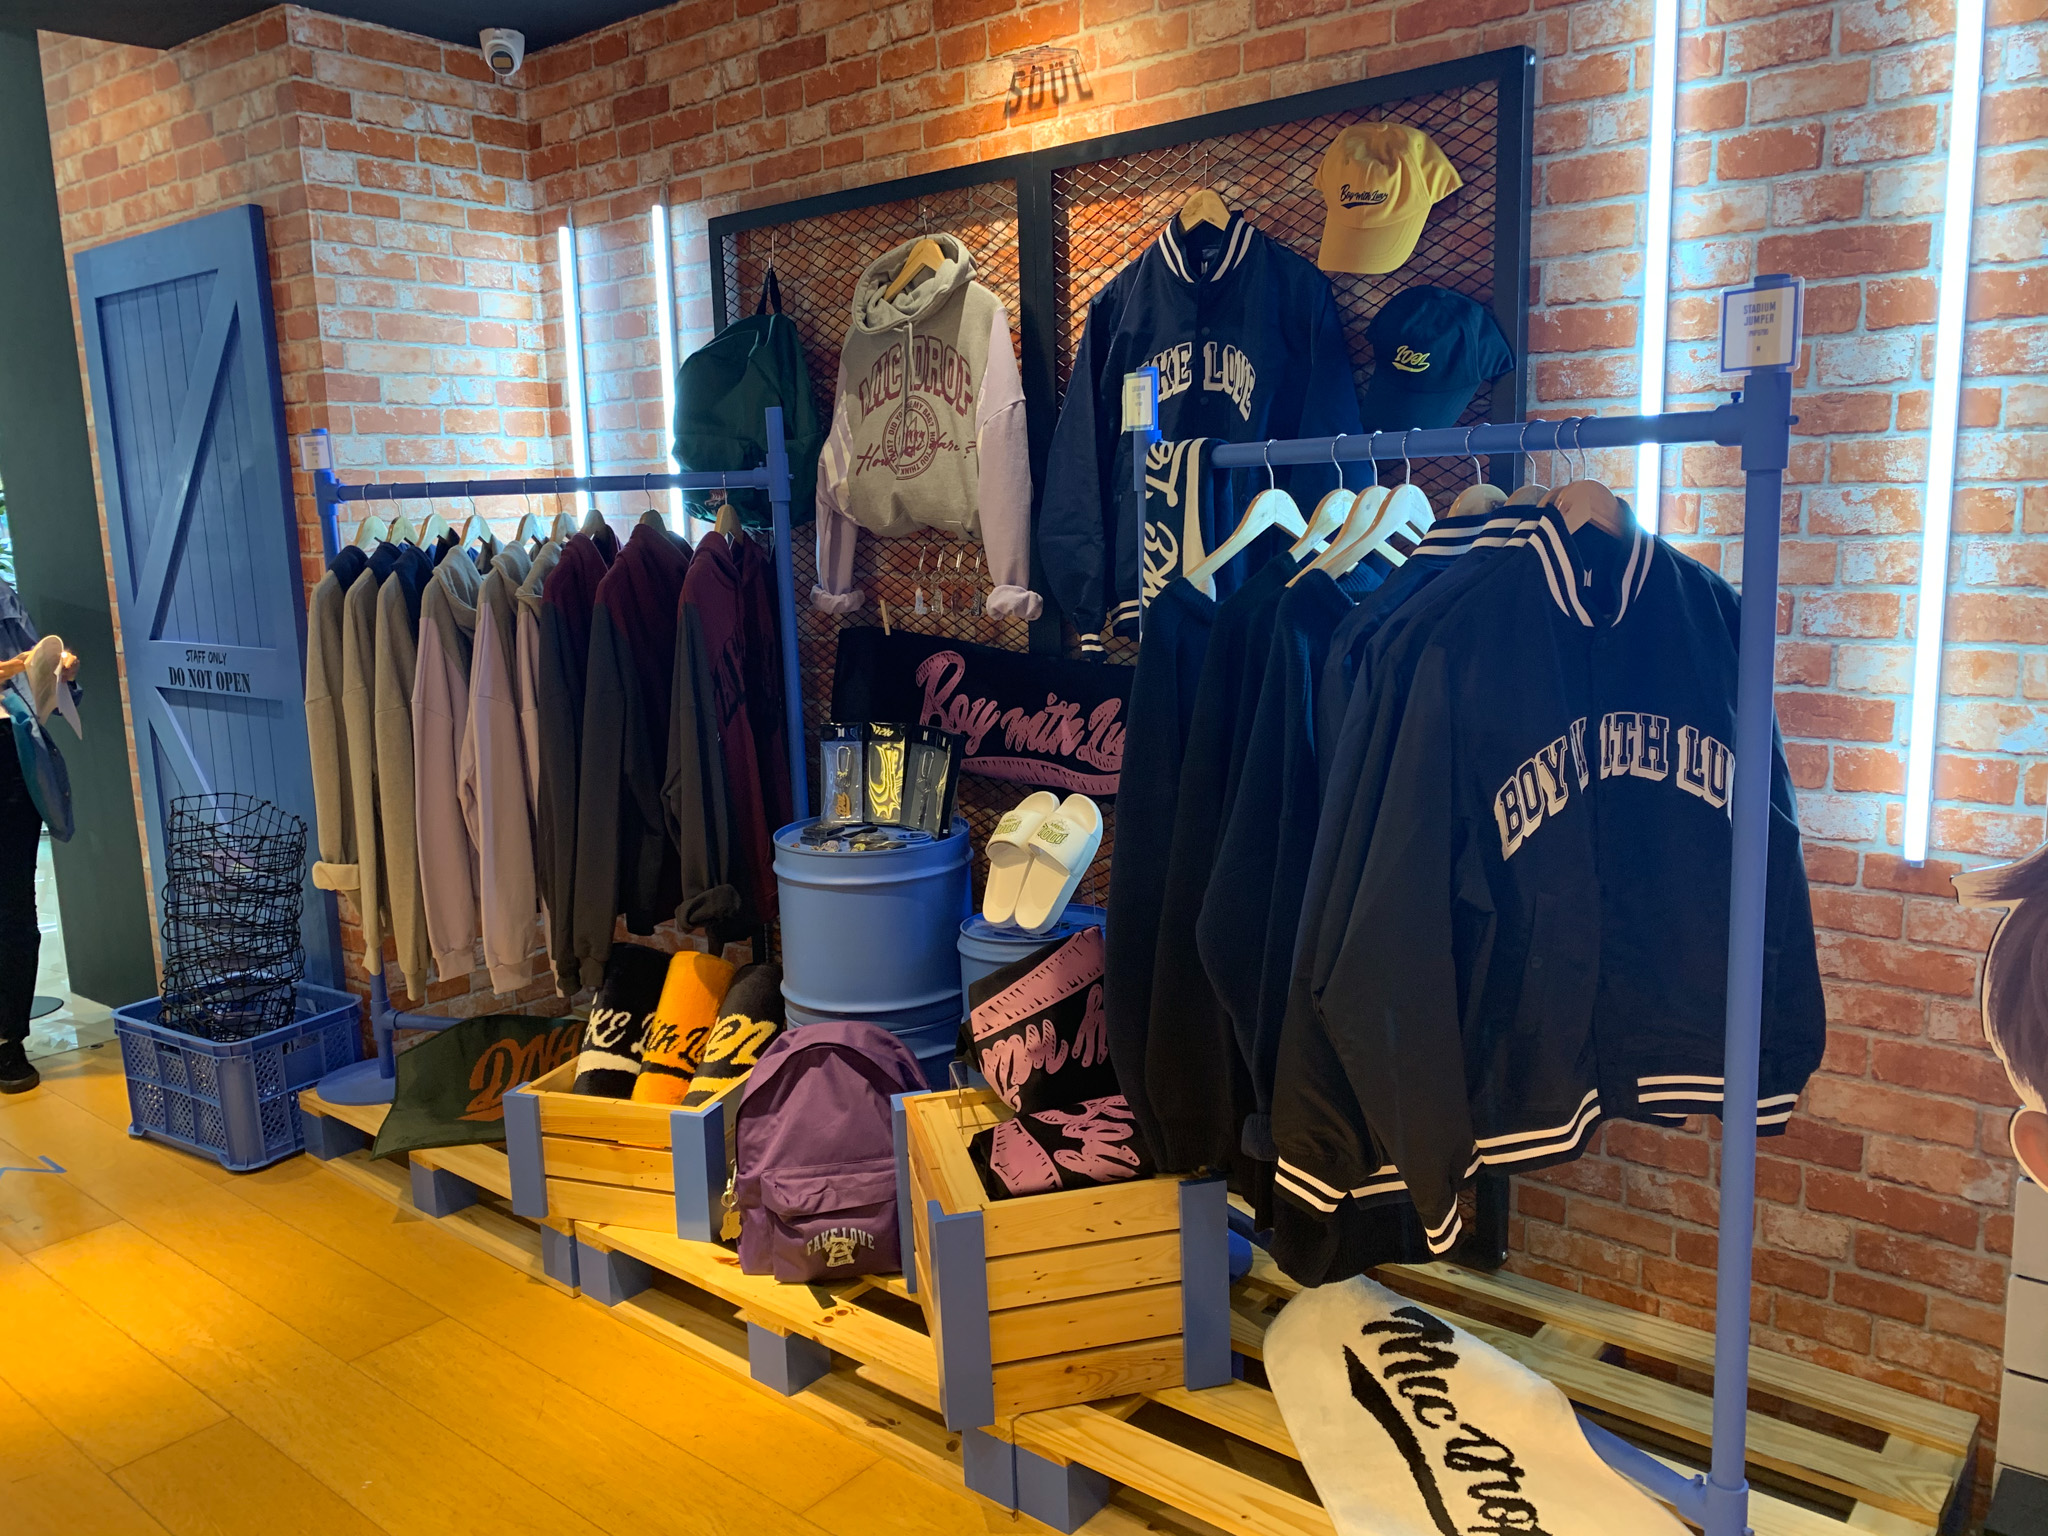 In photos: What to expect from BTS pop-up store in SM Megamall